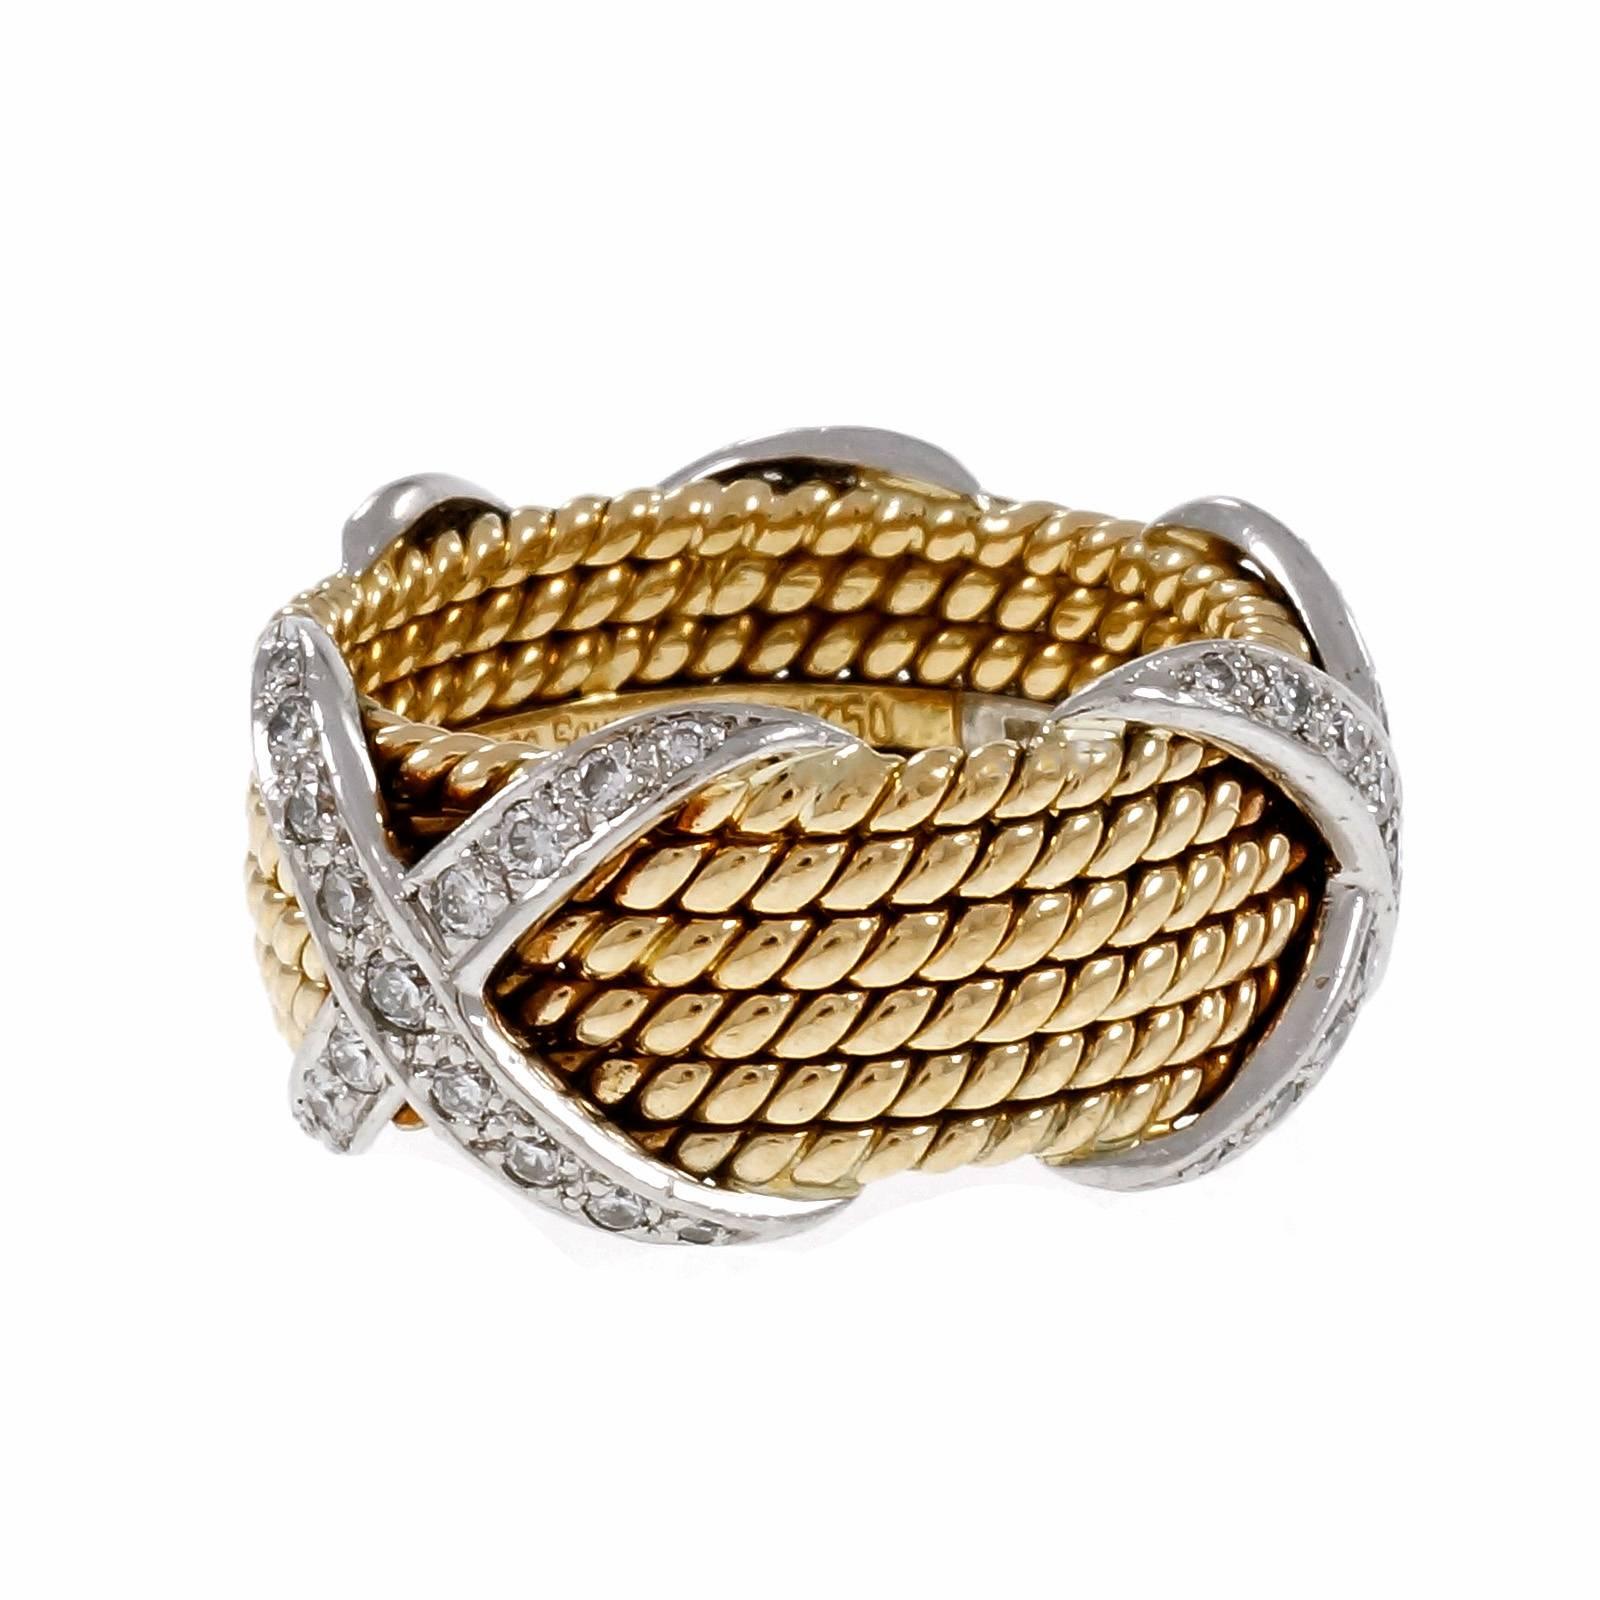 Tiffany & Co Schlumberger 6 row rope “X” ring in 18k yellow gold and platinum diamond Eternity. custom-made factory original size 8. Not sizable

51 round diamonds, approx. total weight .77cts
18k yellow gold & 950 Platinum
Tested: 18k
Stamped: